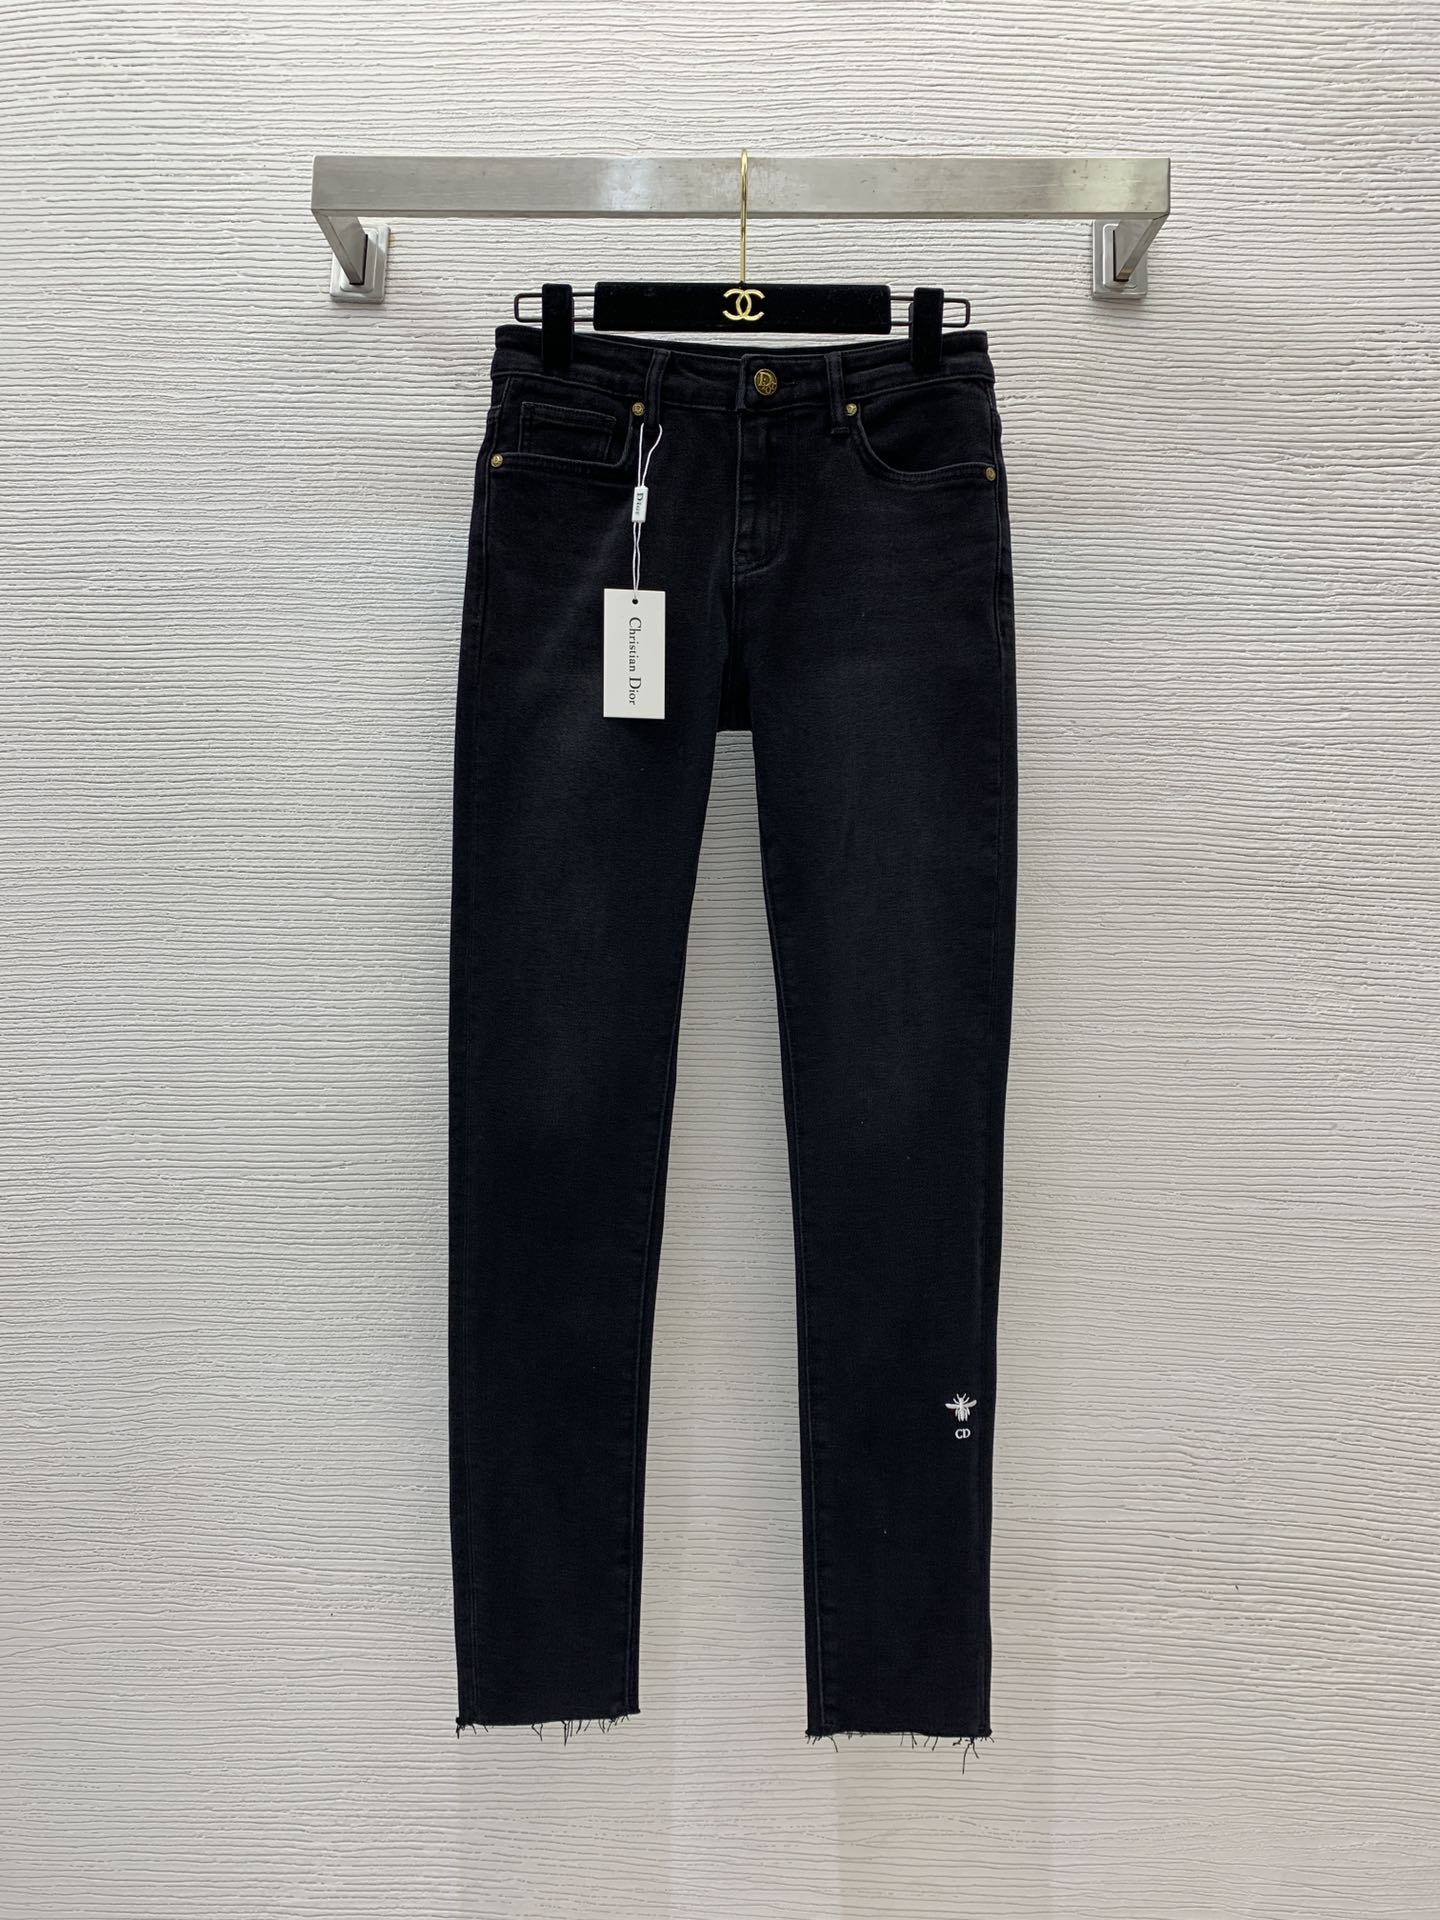 Dior Clothing Jeans Black Blue Grey Embroidery Cotton Spring/Summer Collection